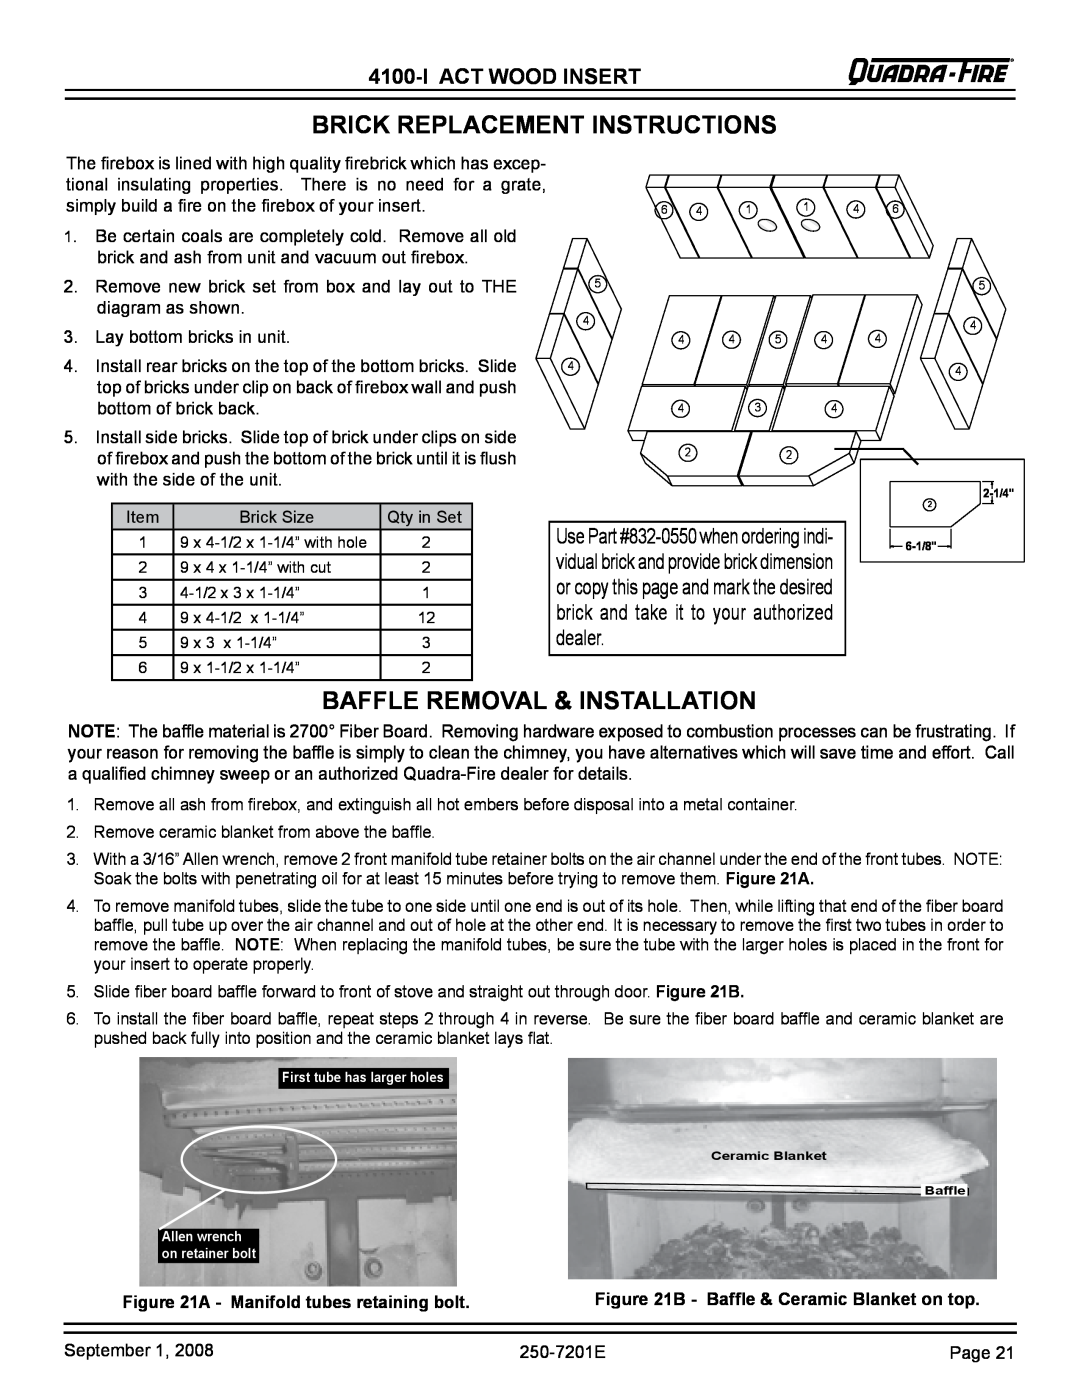 Hearth and Home Technologies 4100I-GD-B brick replacement instructions, Baffle Removal & Installation, I Act Wood Insert 